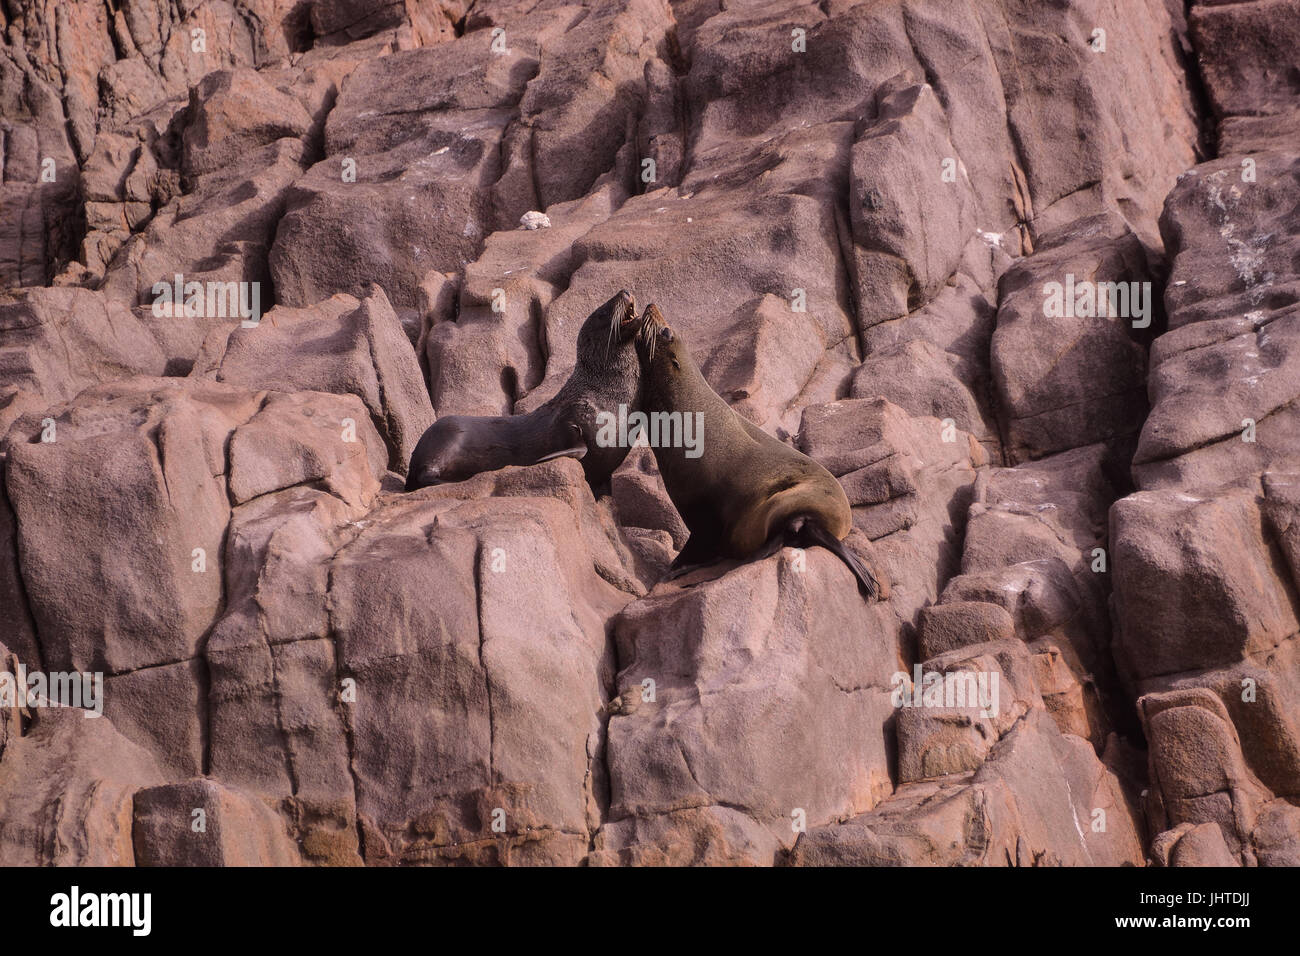 Two Australian fur seals playing with each other on a rockface in Port Stephens, New south wales, Australia. Stock Photo